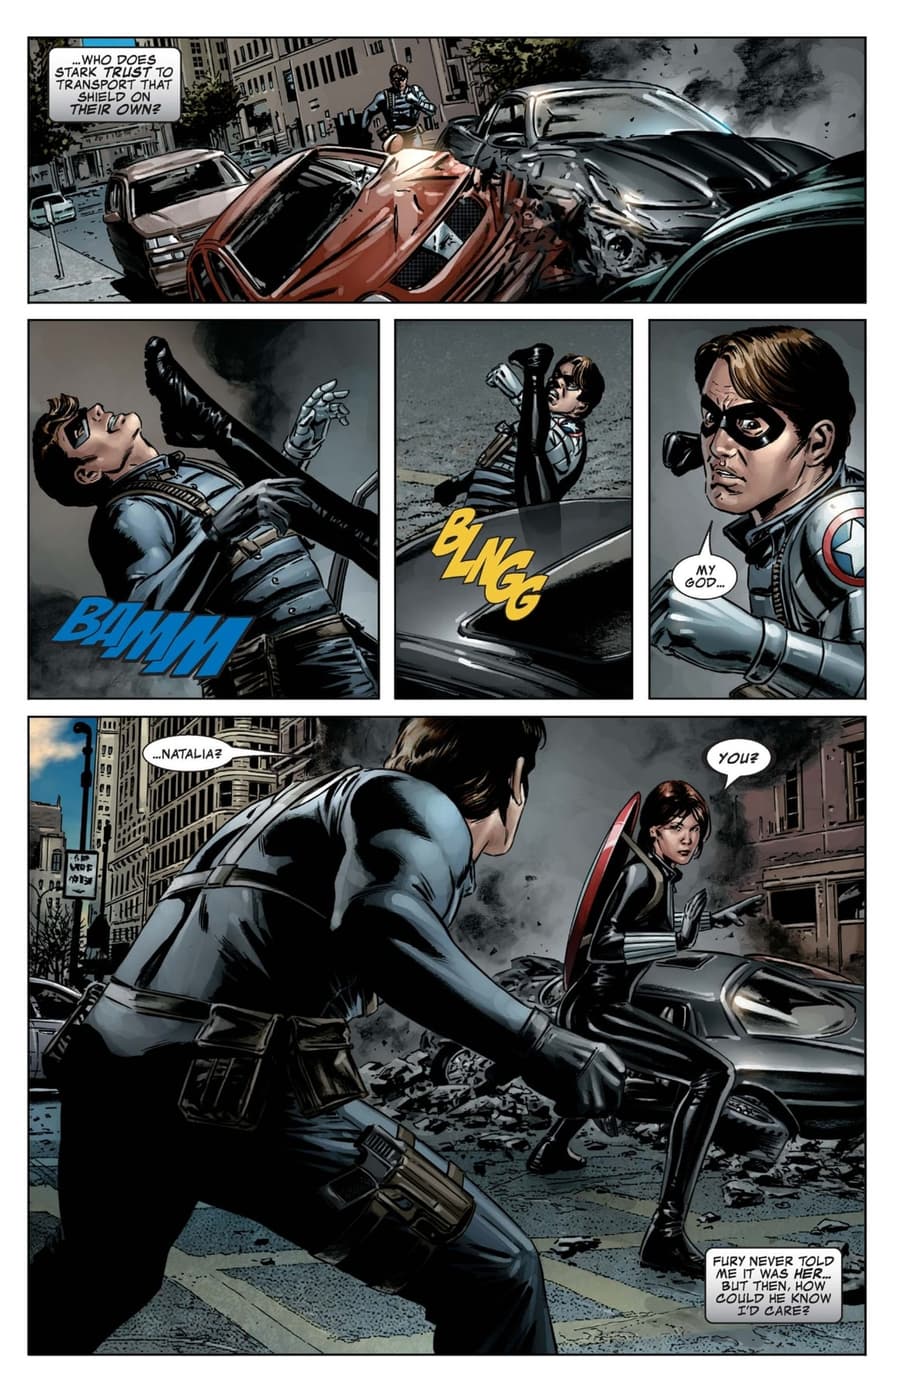 CAPTAIN AMERICA (2004) #27 page by Ed Brubaker, Steve Epting, and Mike Perkins